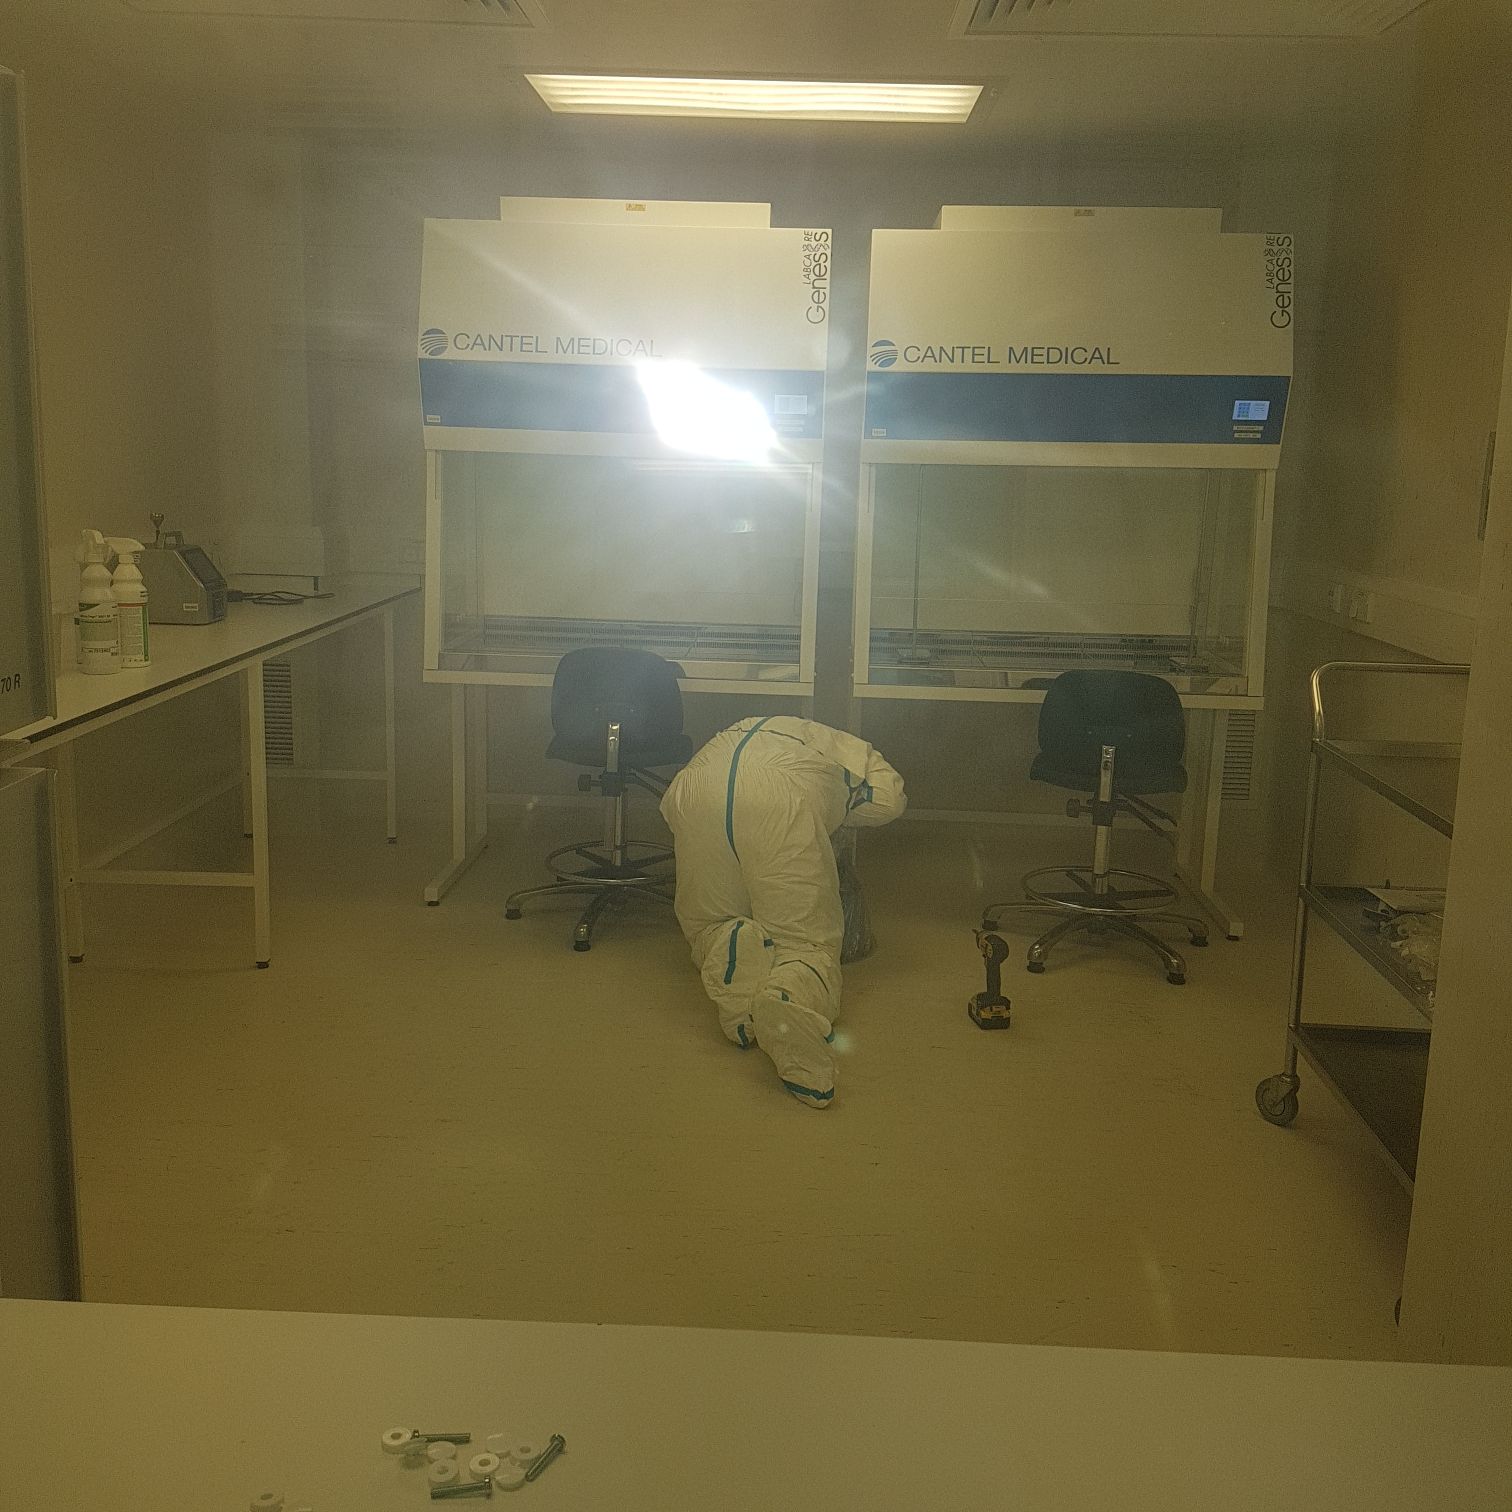 Working in the sterile environment